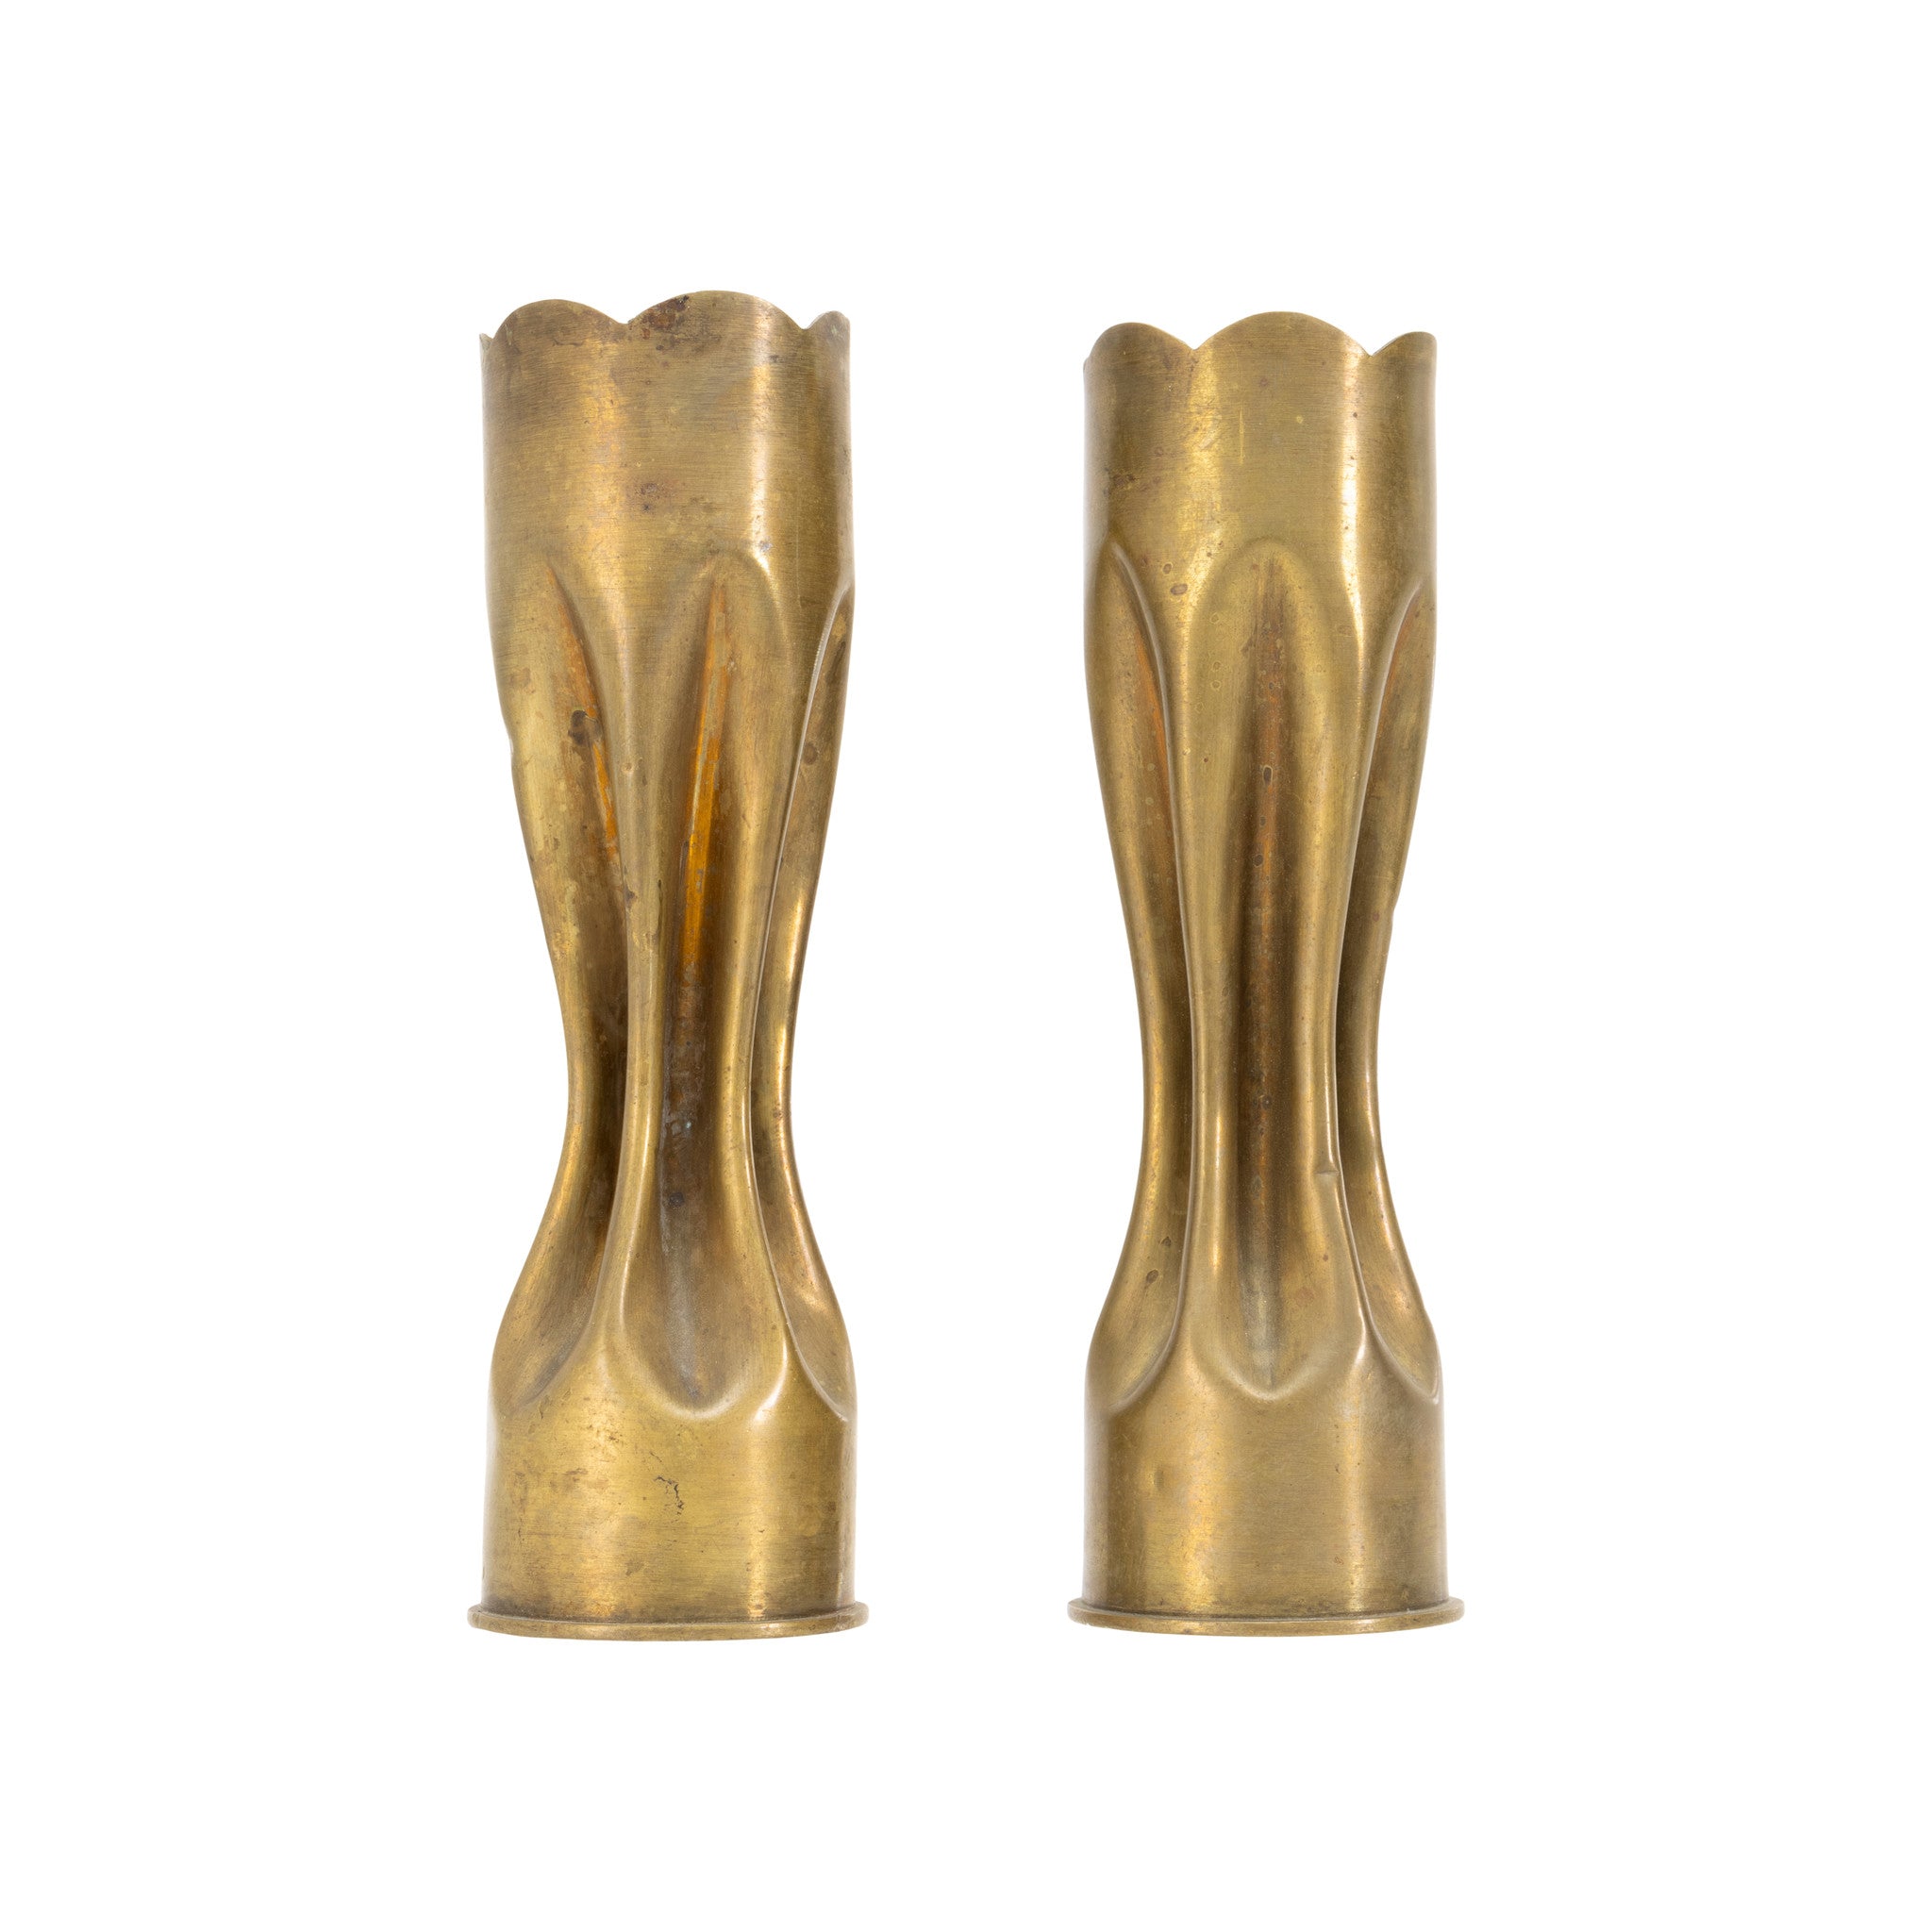 Pair of WWI Trench Art Vases